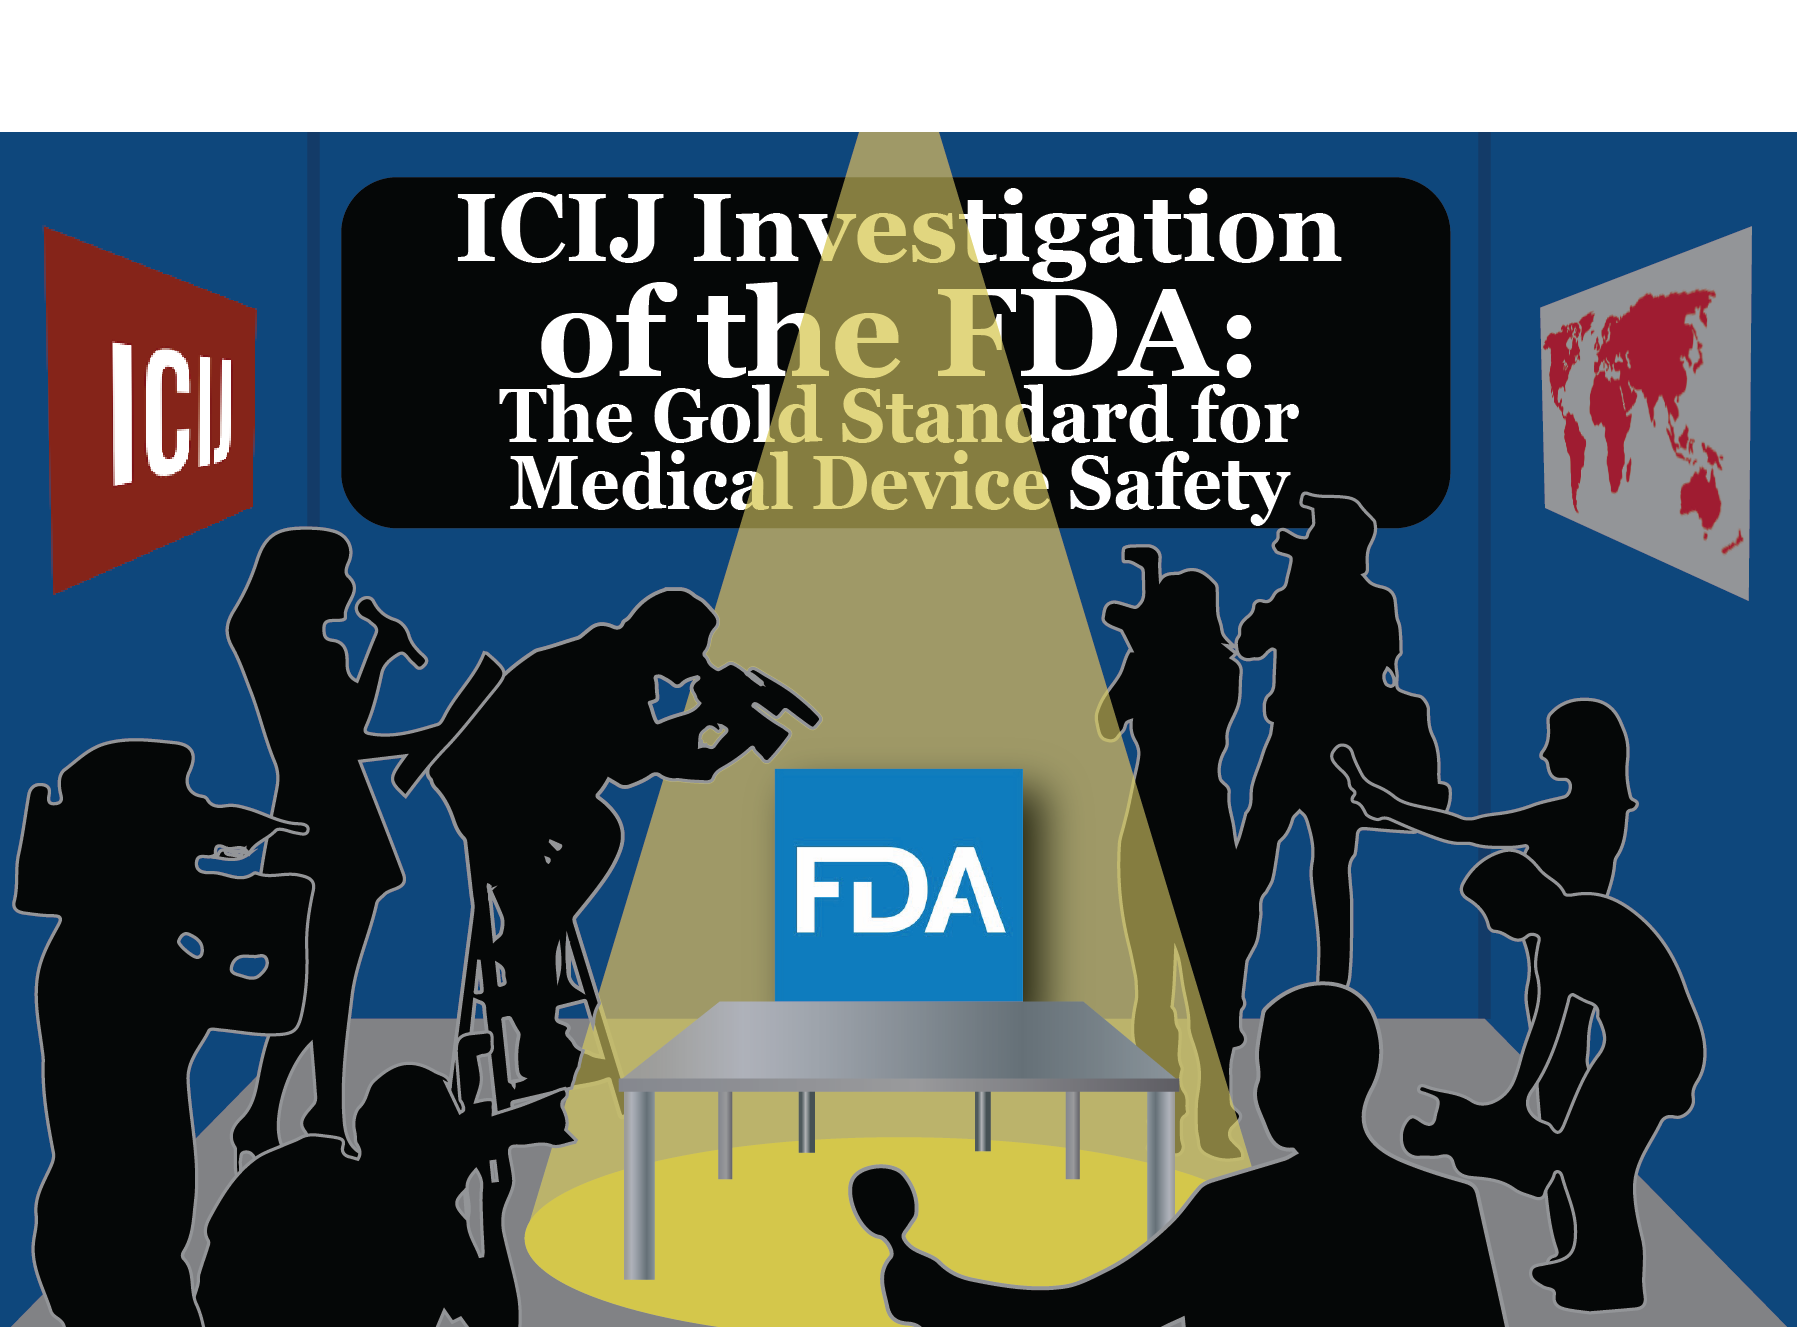 ICIJ Investigation of the FDA: the Gold Standard for Medical Device Safety